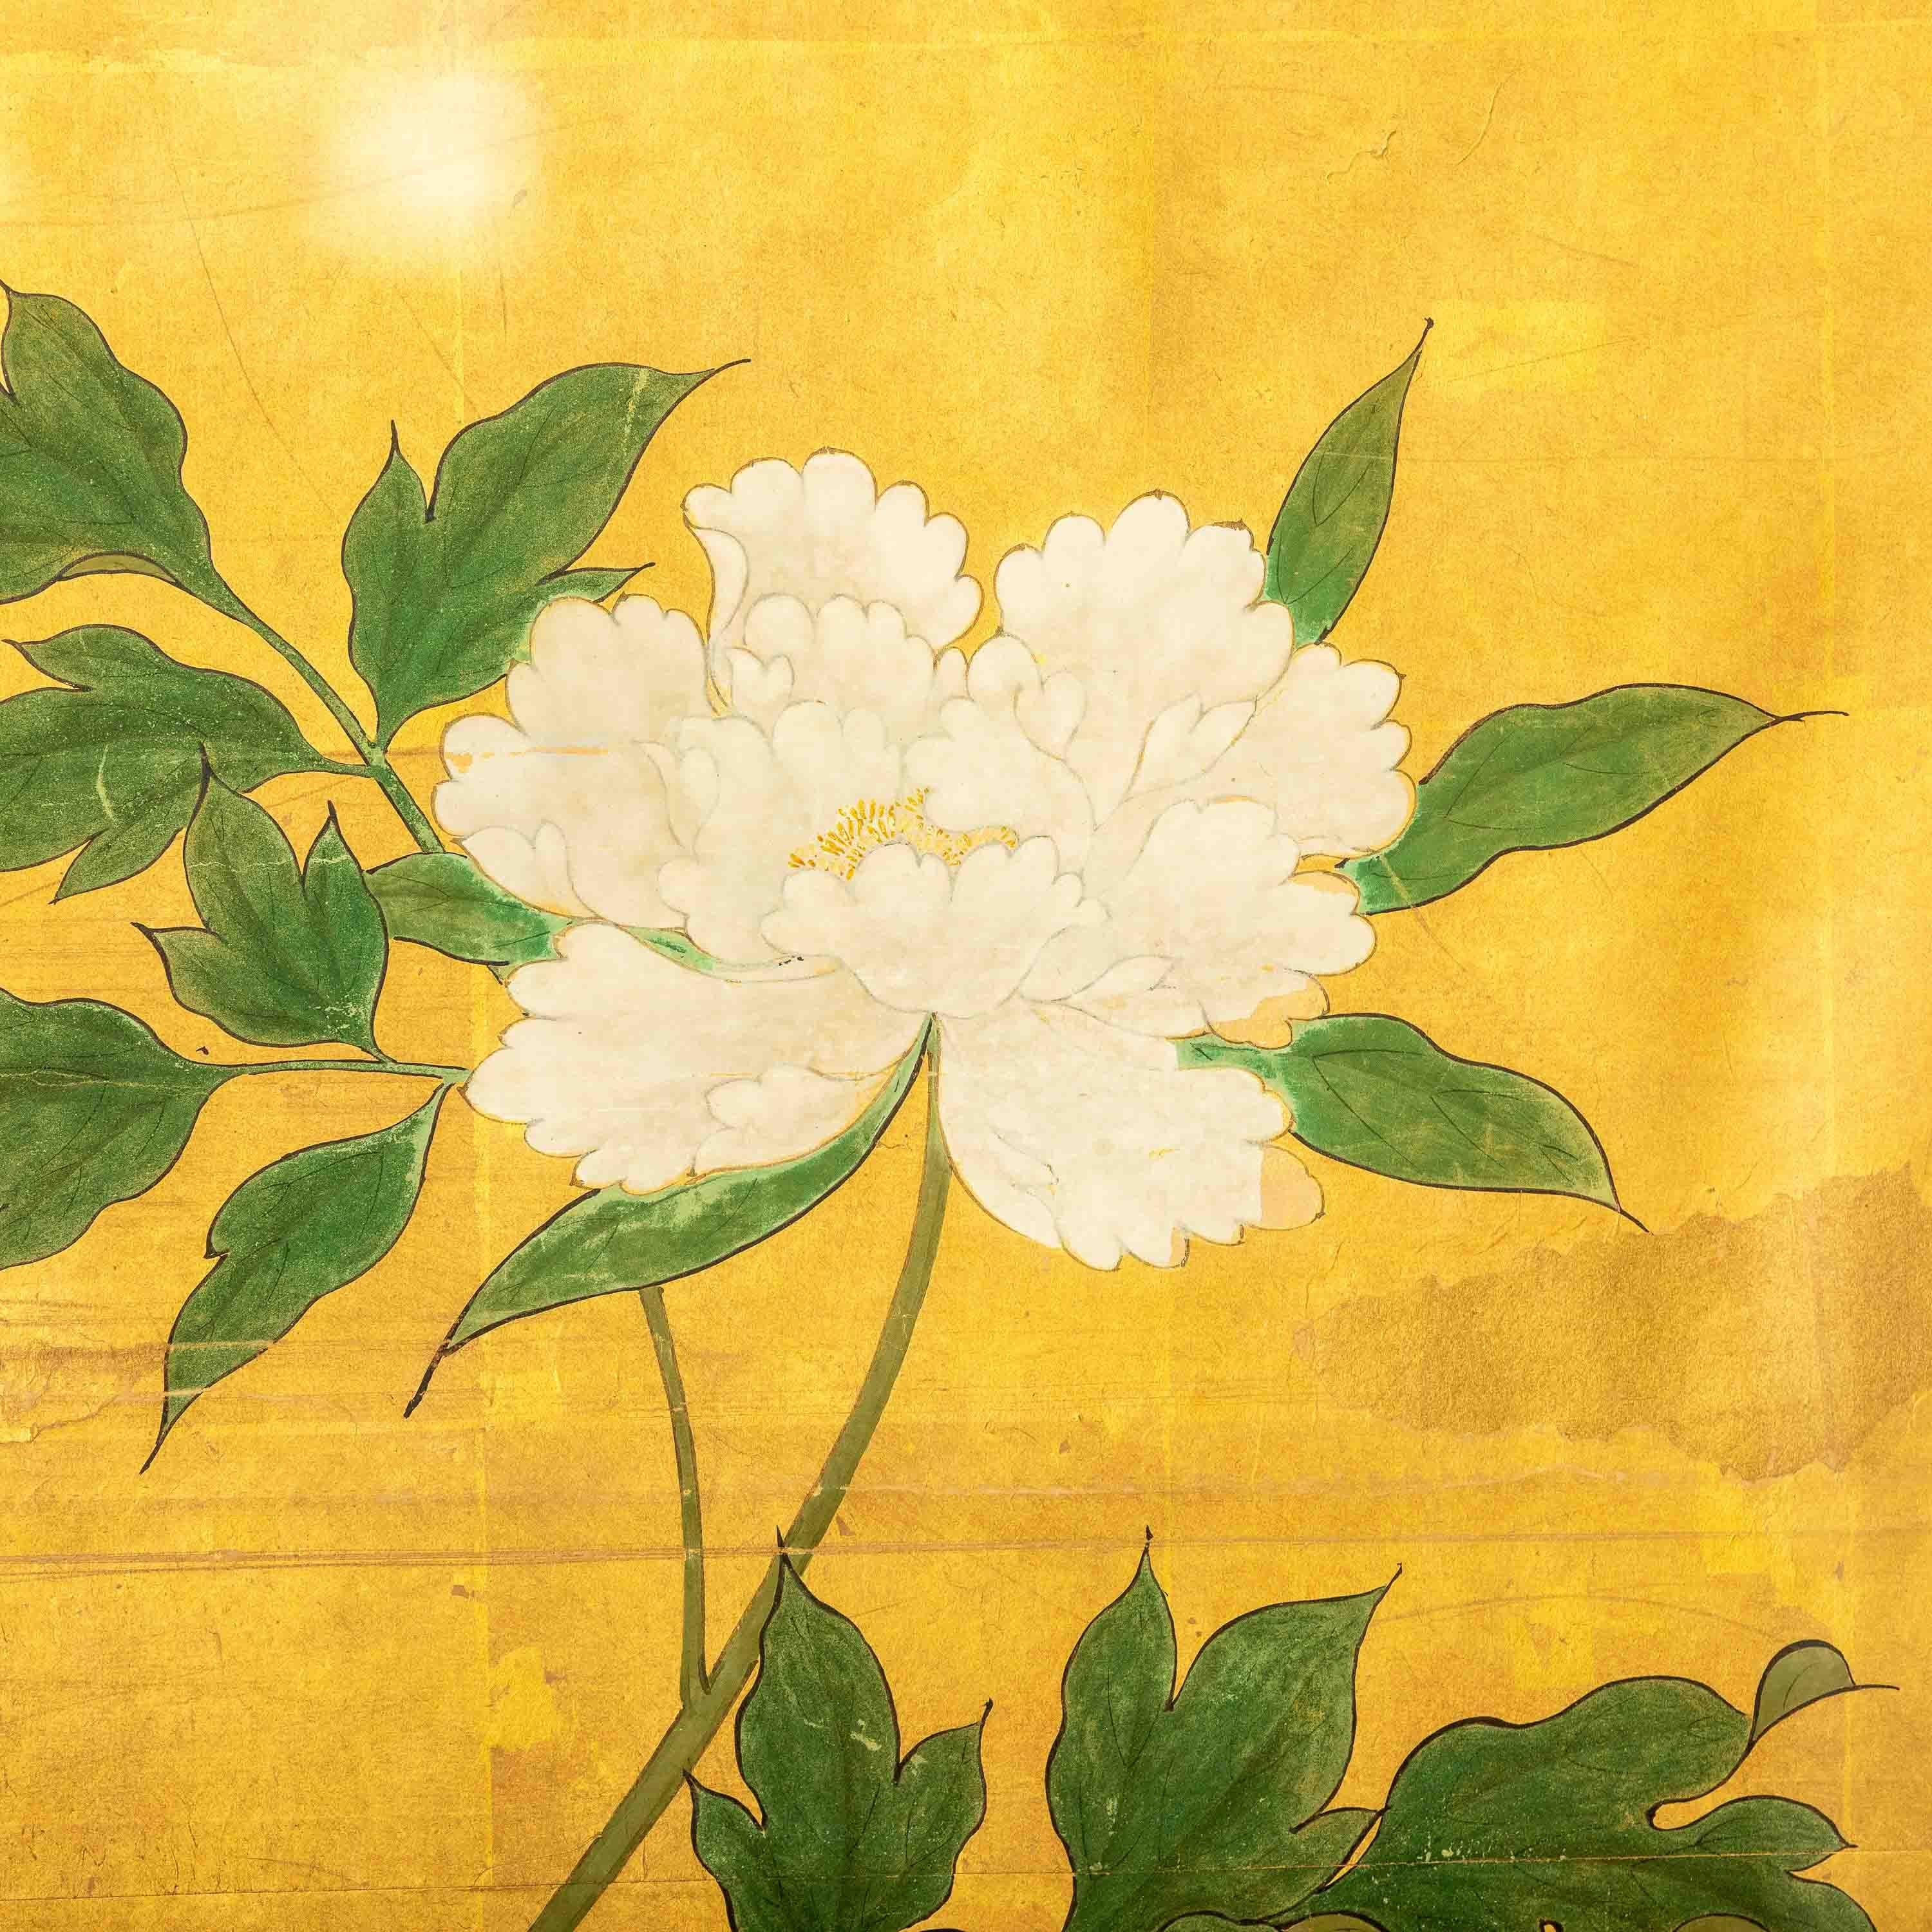 This beautiful stylized depiction of red and white peonies once adorned a traditional four panel screen. Now it sits within its handmade frame, ready to grace your walls. The peony is known to the Japanese as the 'King of Flowers', it symbolizes